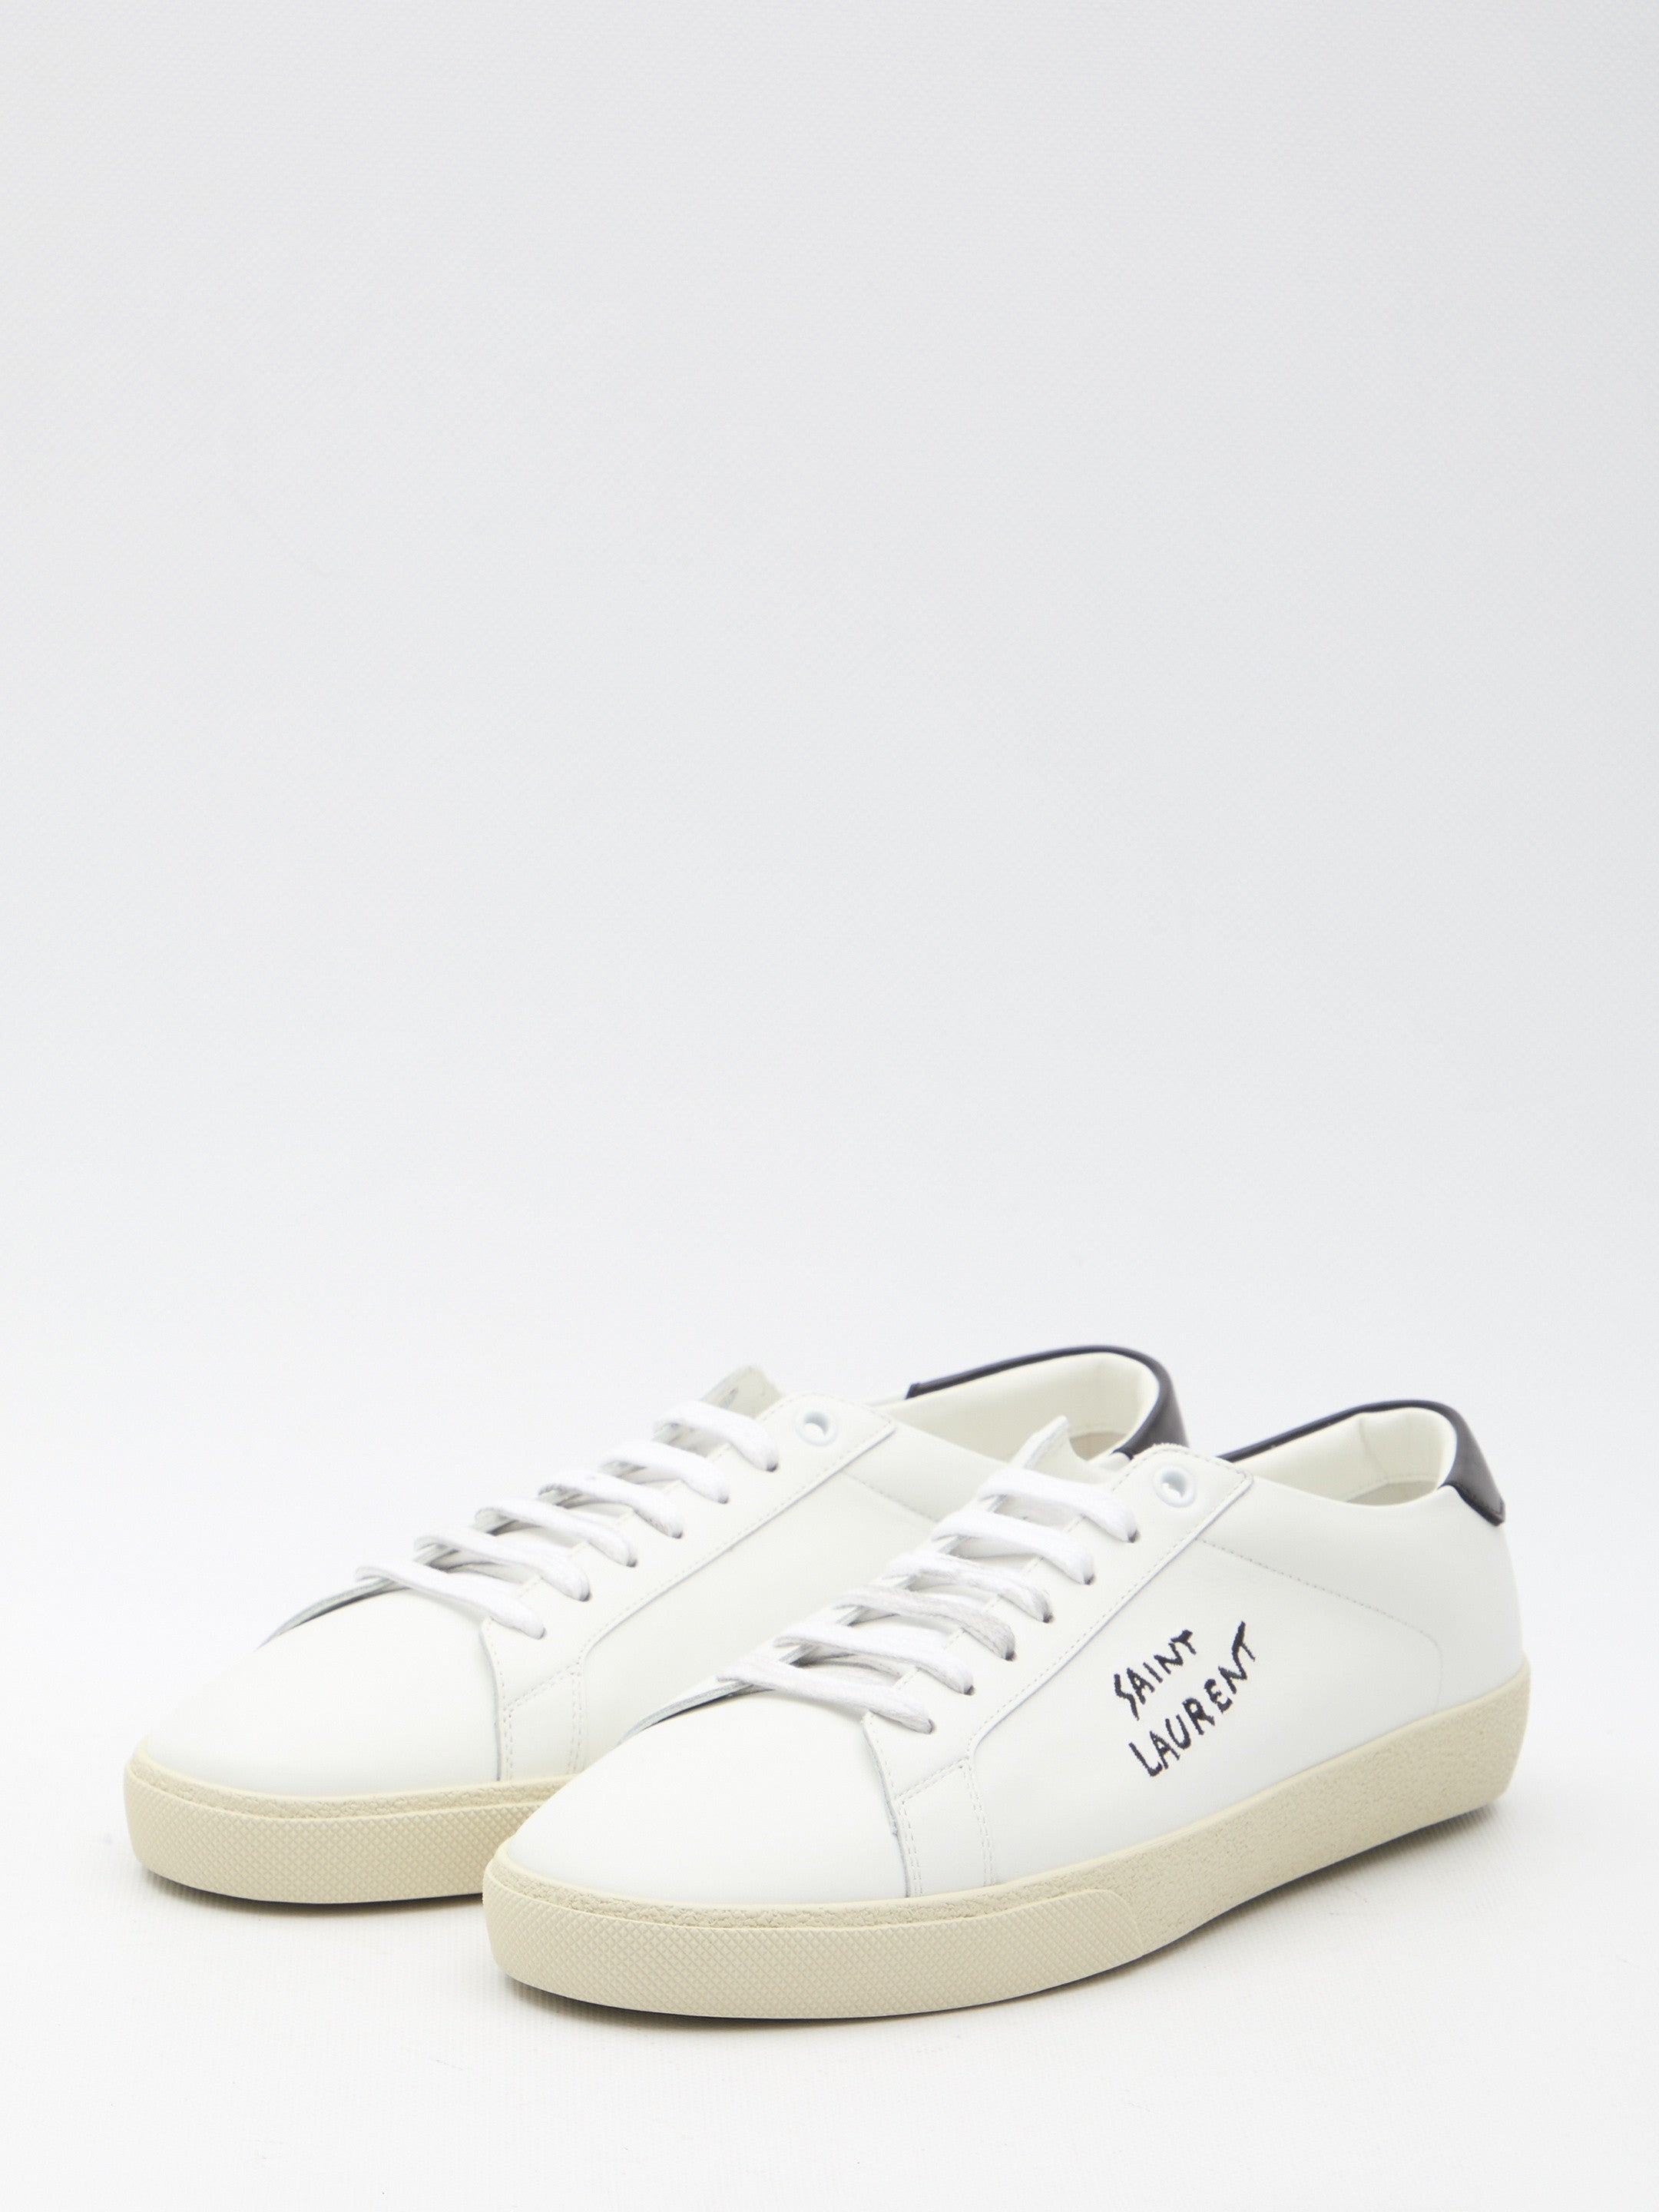 SAINT-LAURENT-OUTLET-SALE-Court-SL06-sneakers-Sneakers-ARCHIVE-COLLECTION-2.jpg